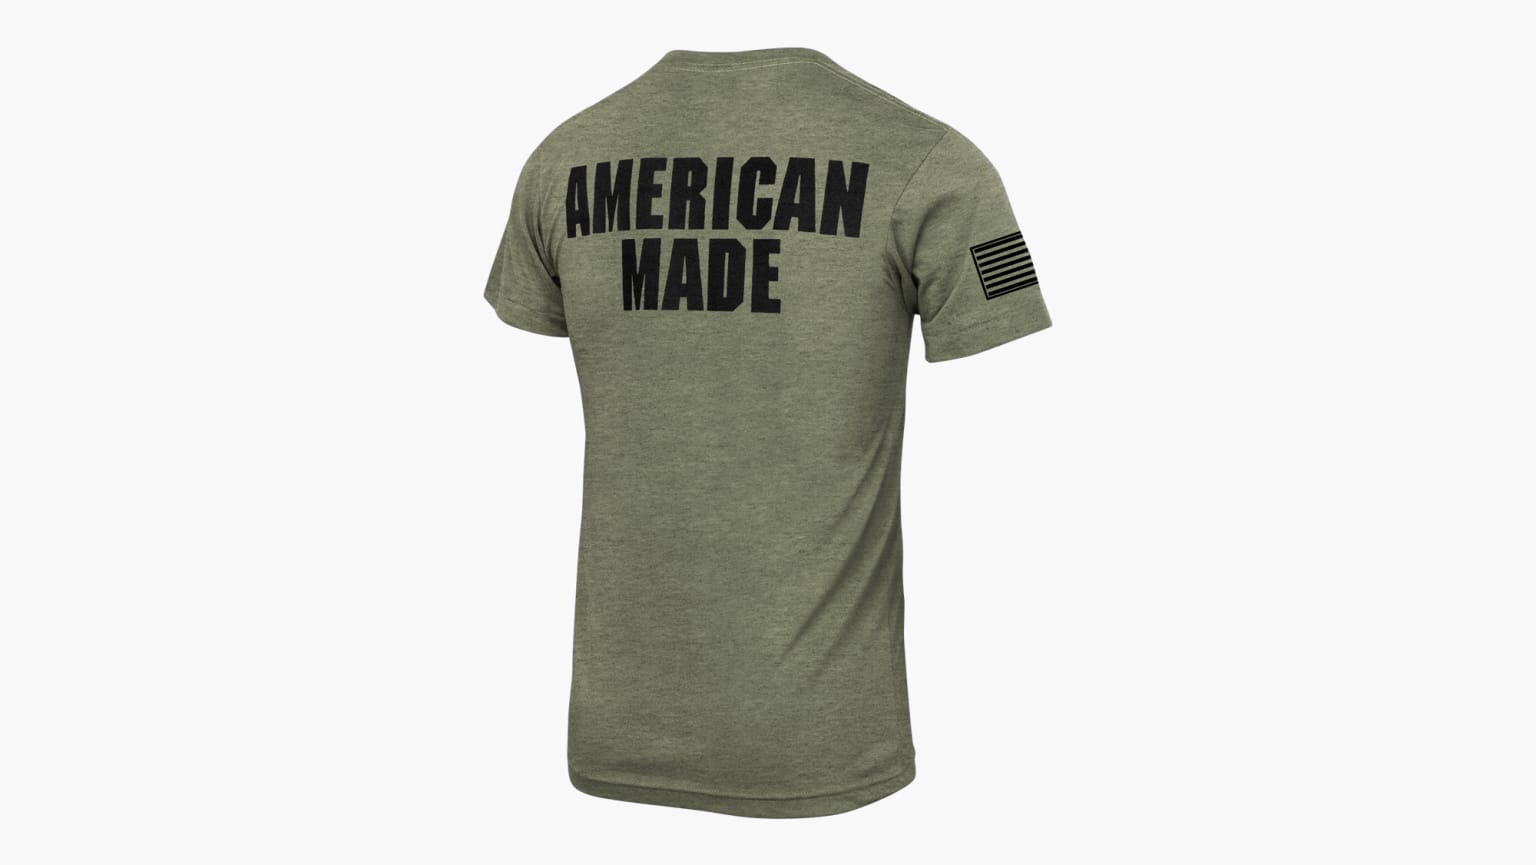 Training Apparel That's Made in the USA